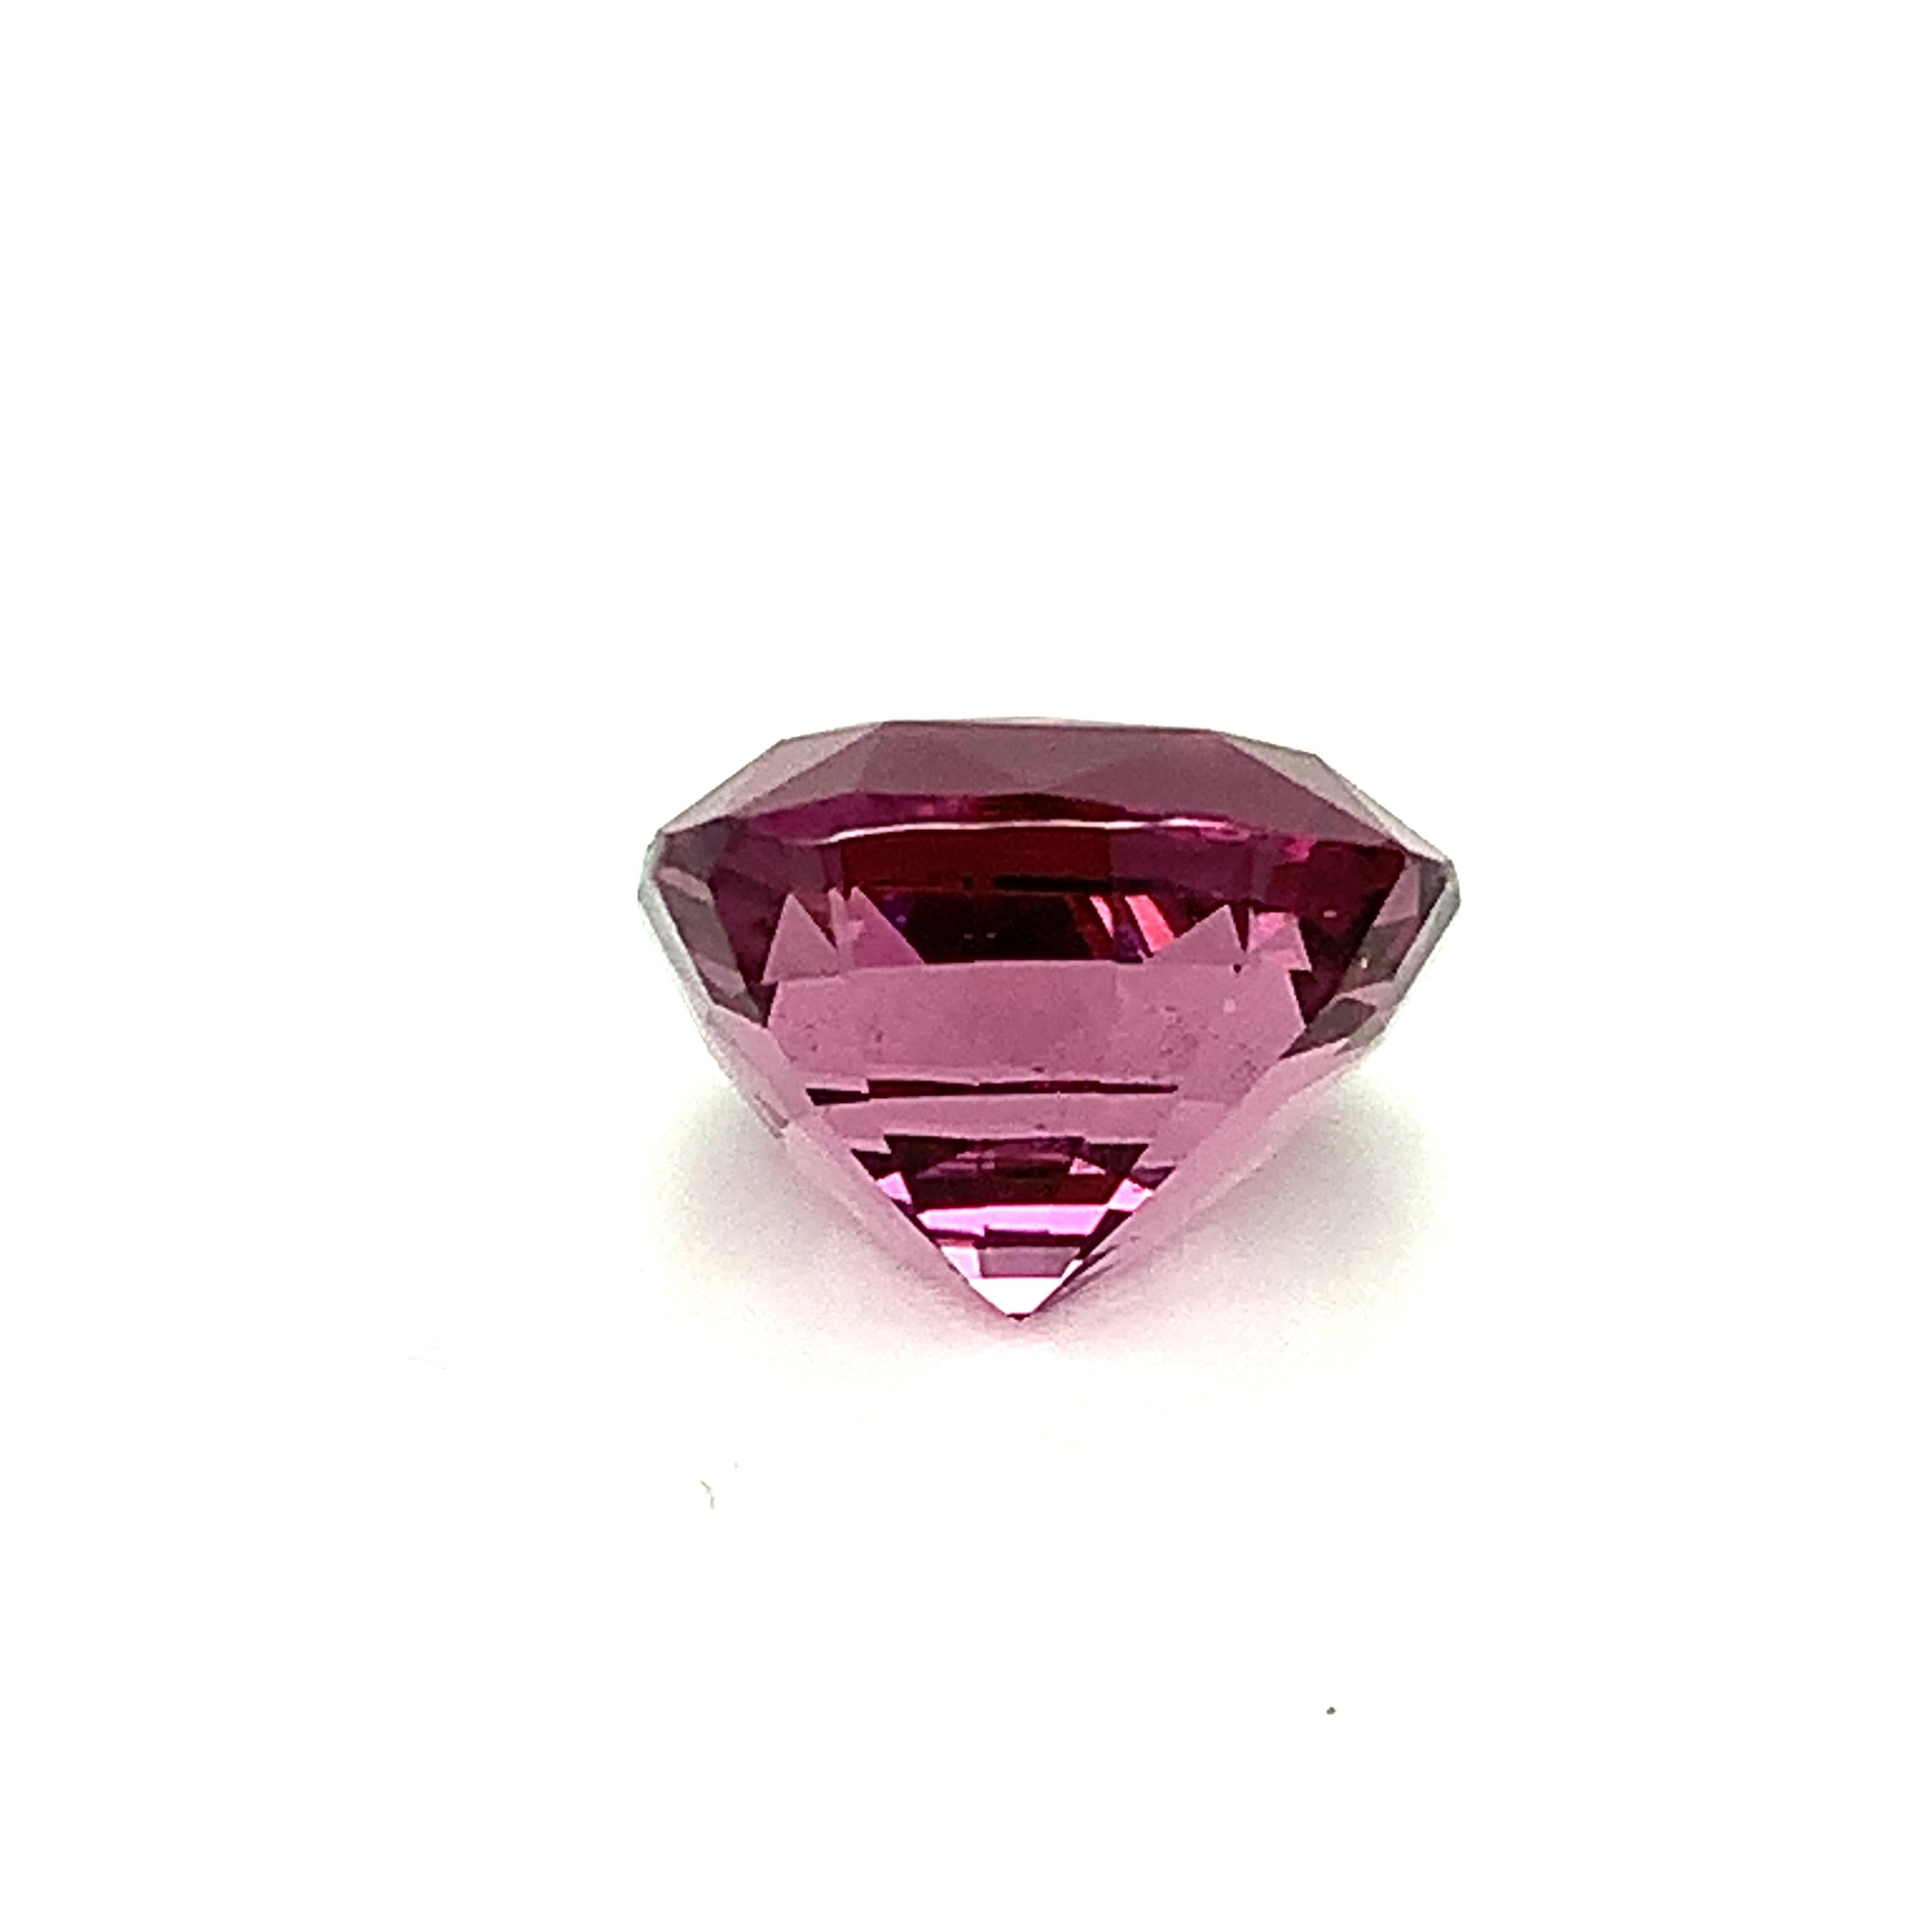 Women's or Men's Unheated 10.21 Carat Pink Purple Spinel, Loose Gemstone, GIA Certified ...A For Sale